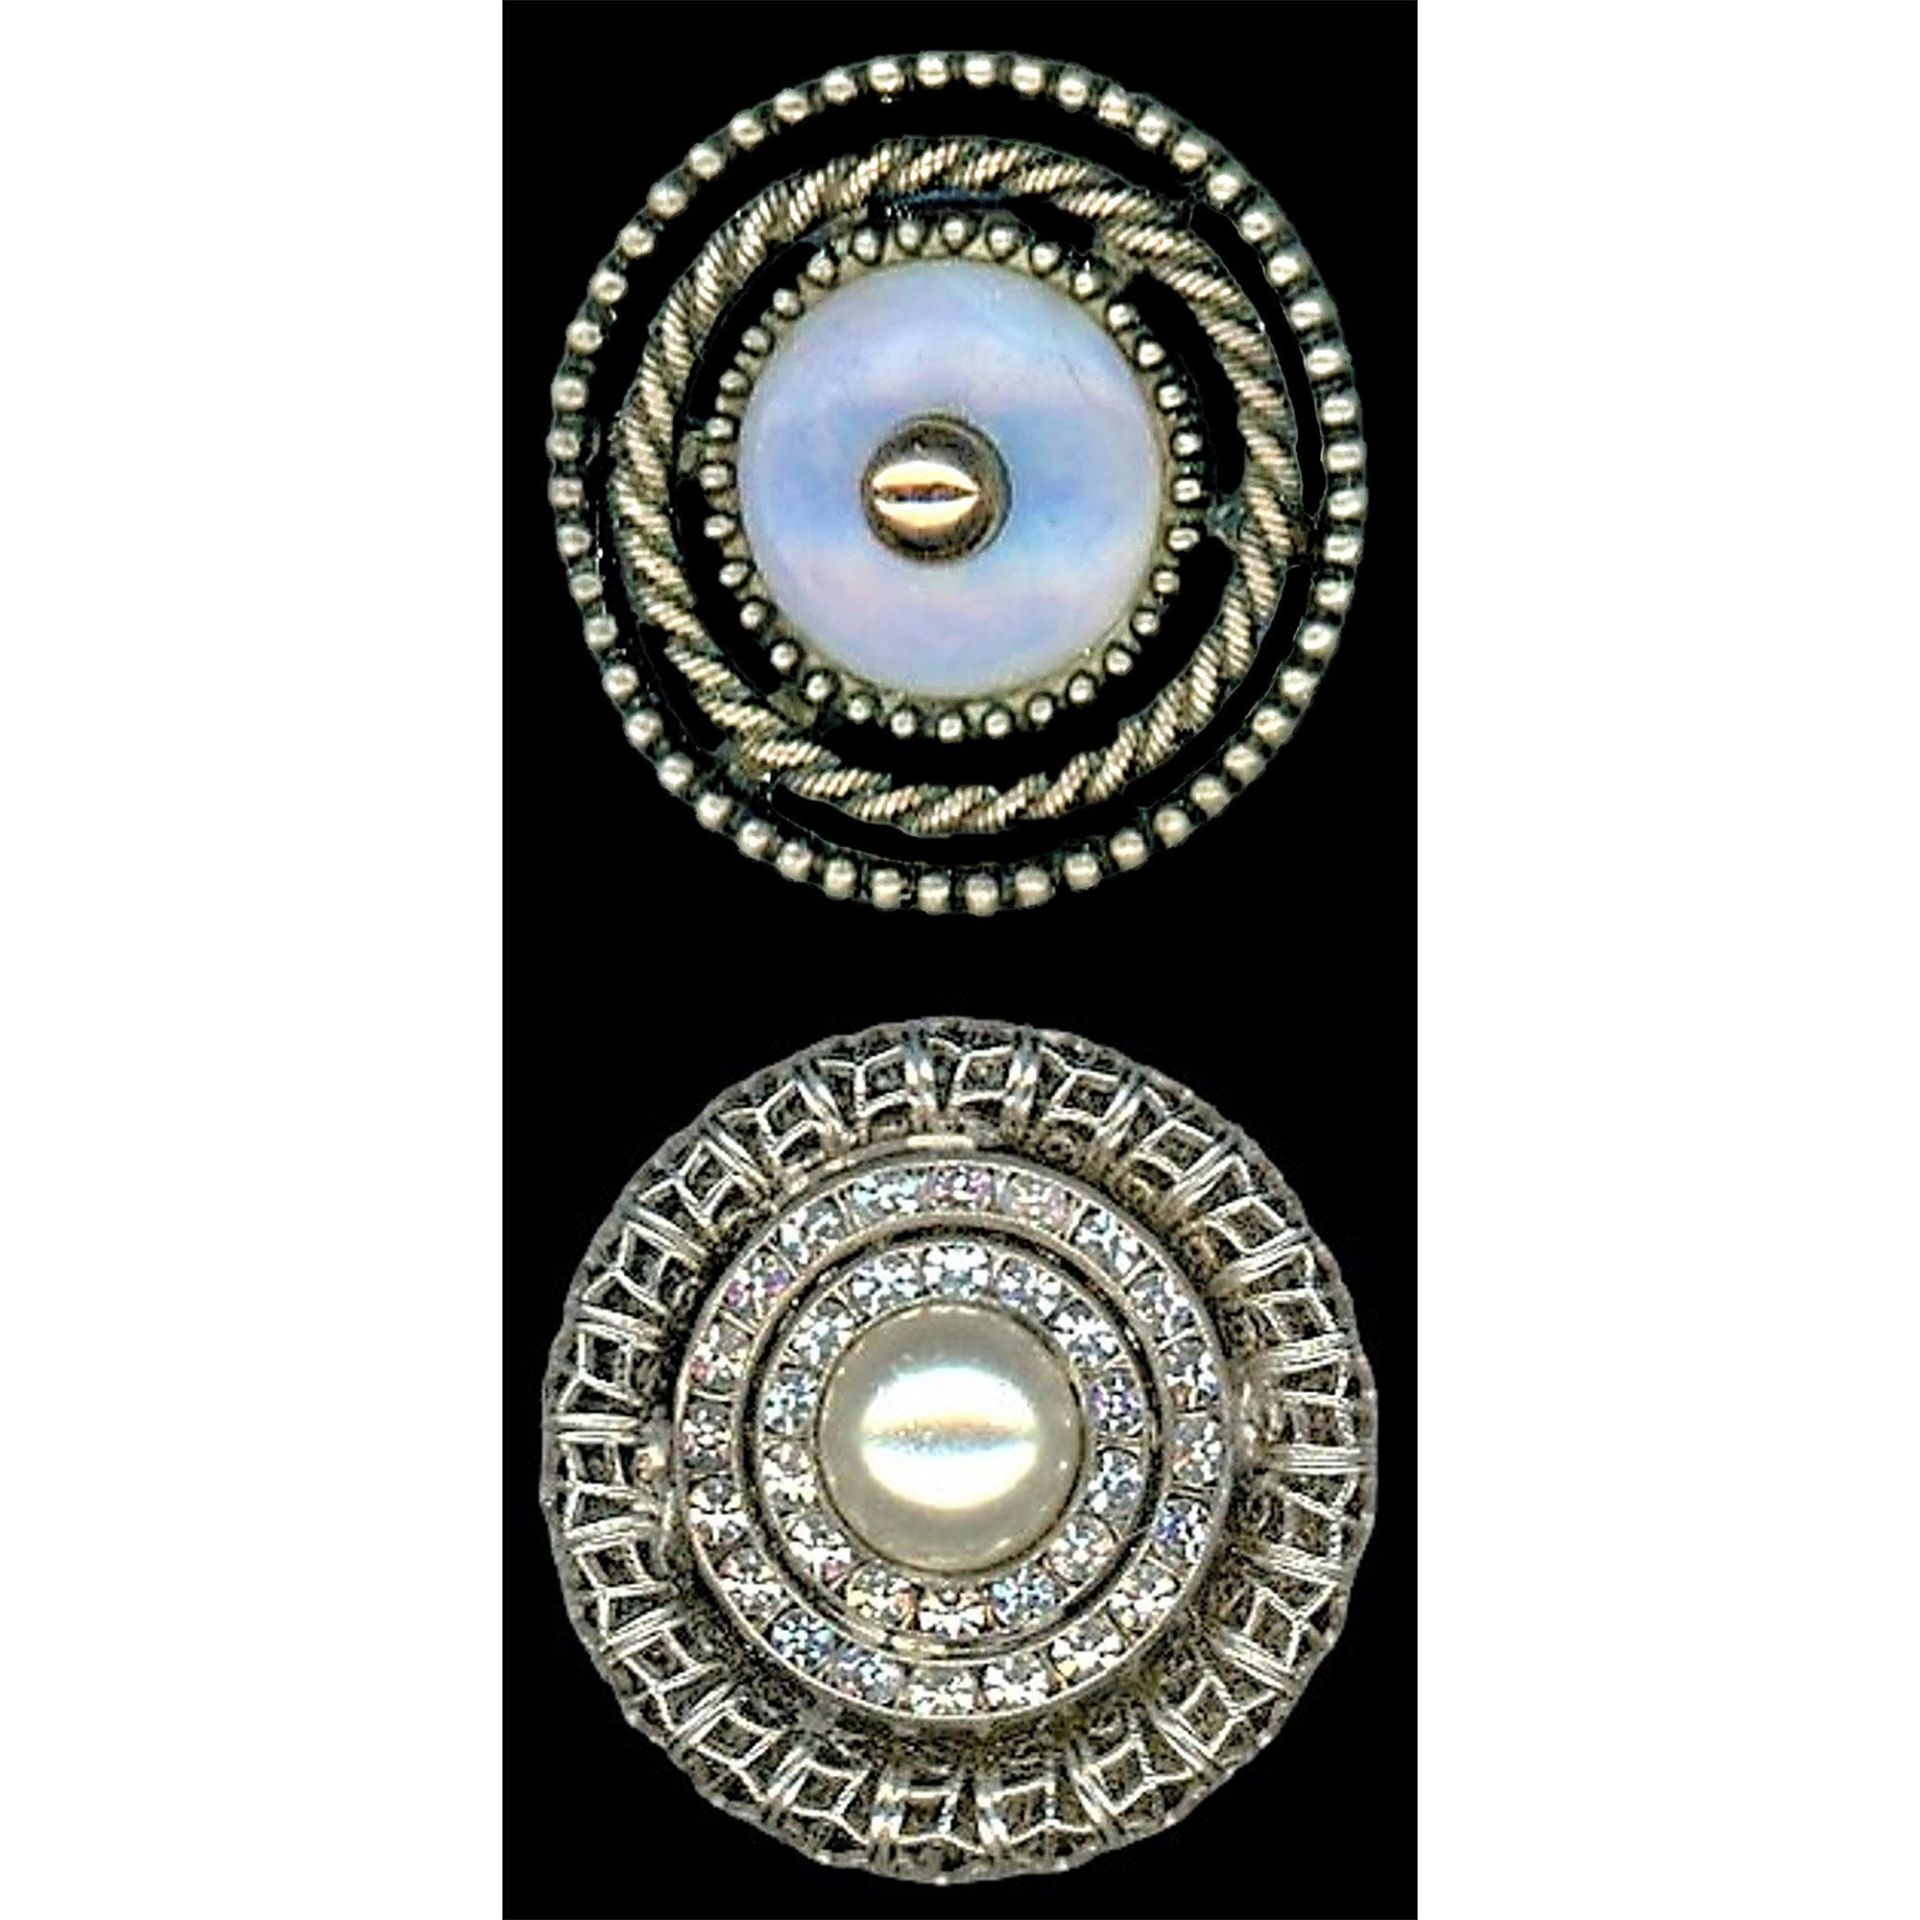 A Small Card of Metal Jeweled Buttons